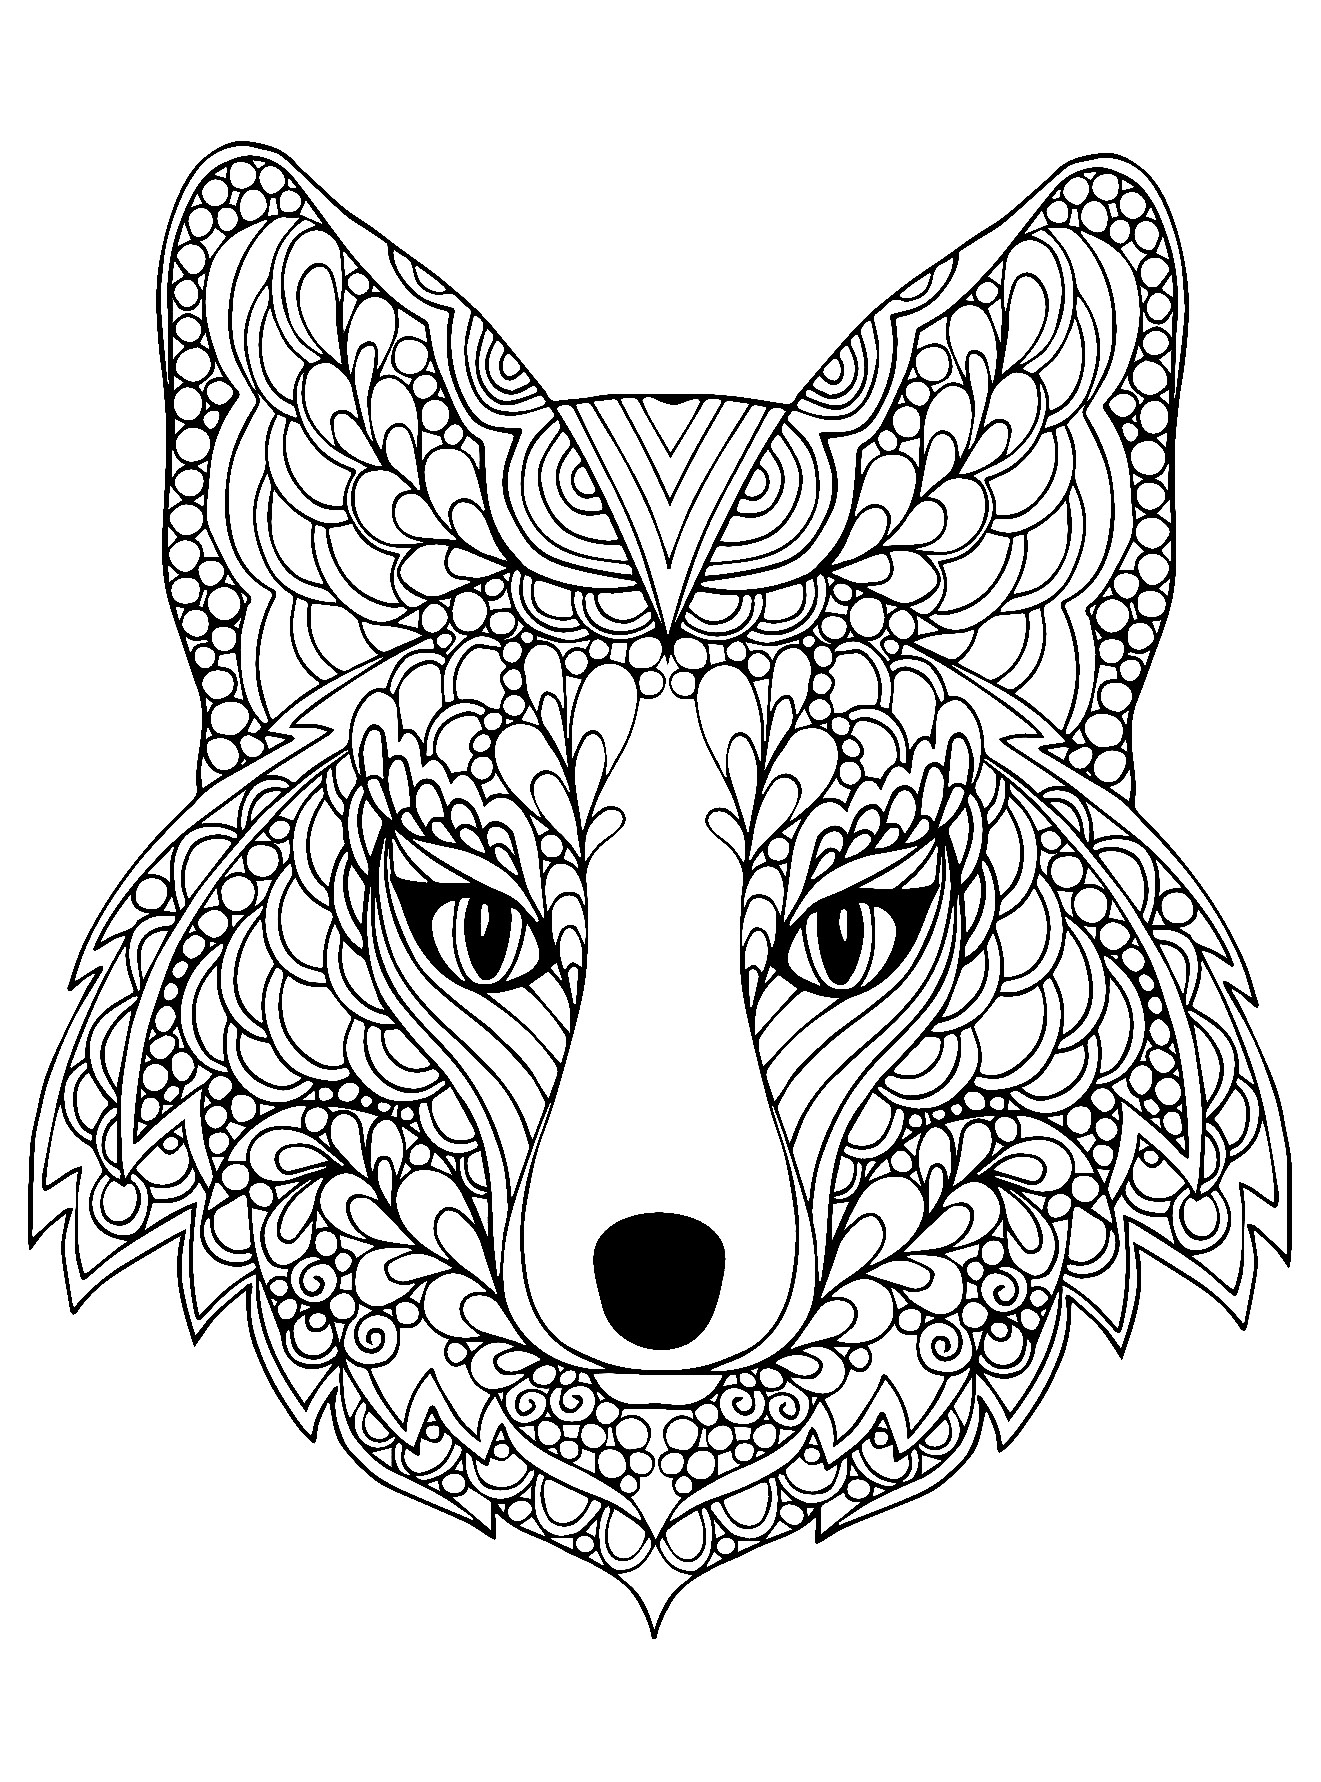 Cool Fox’s Head Coloring Page